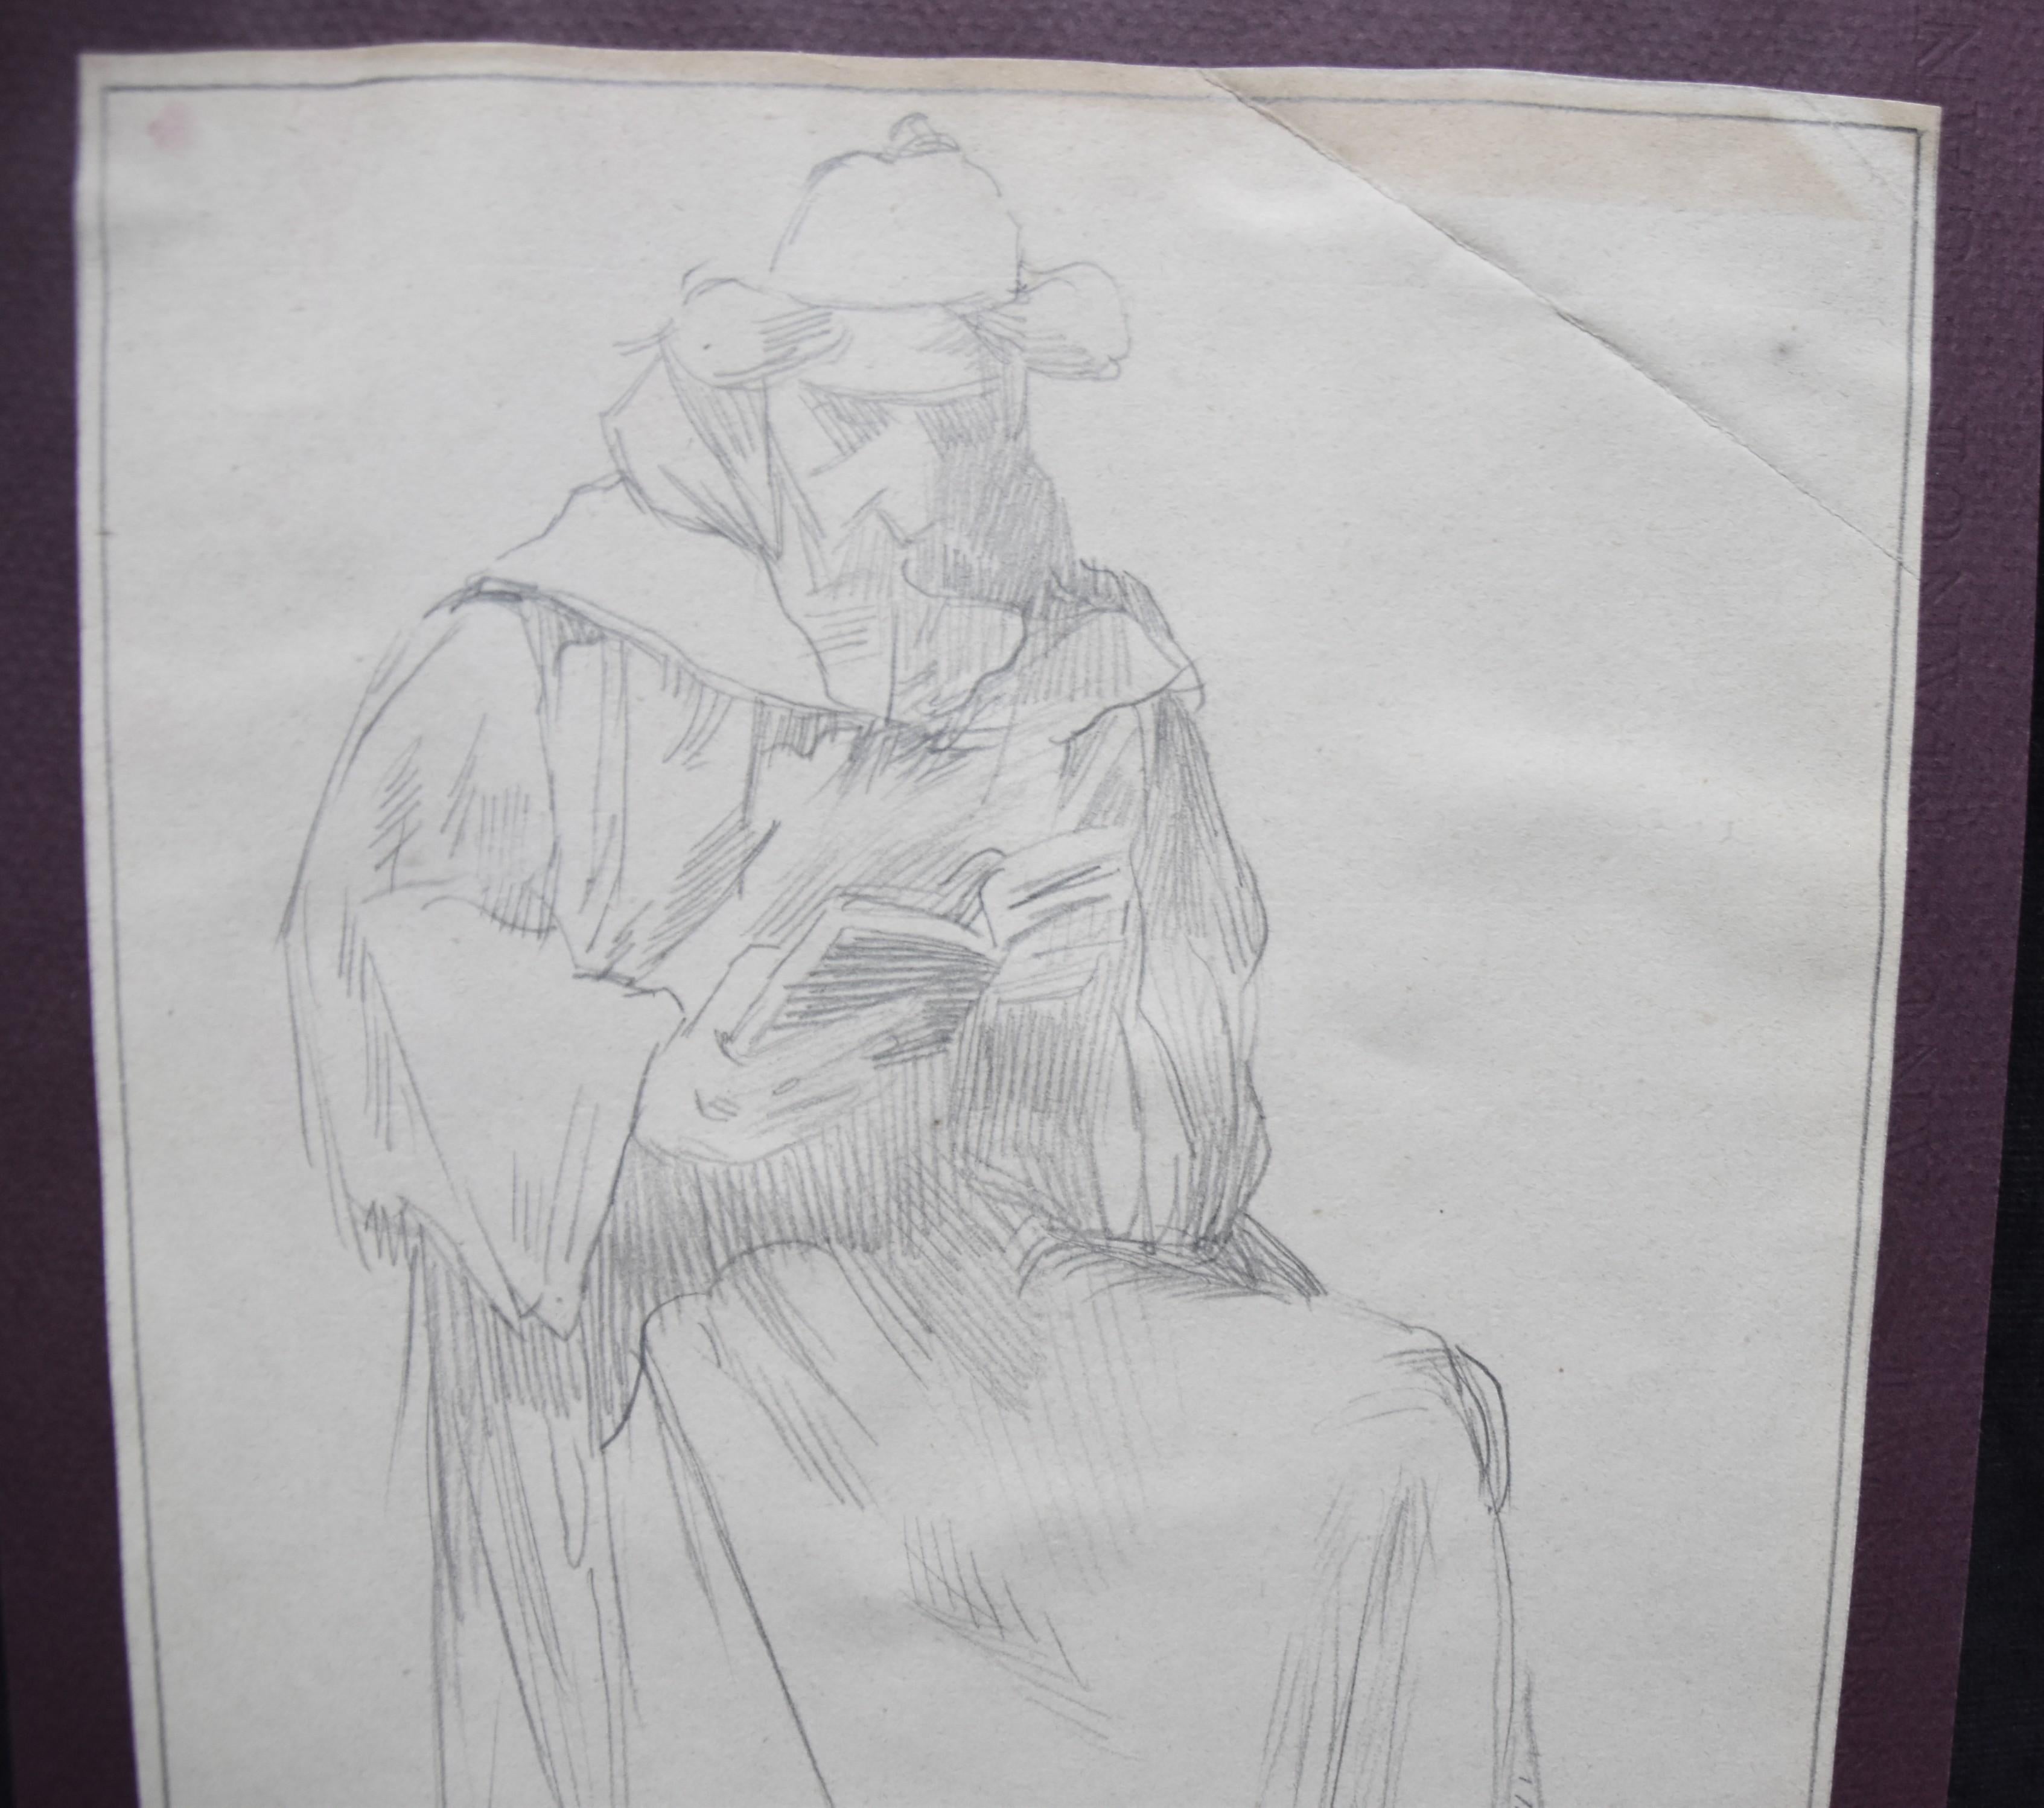 Jean-Pierre Laurens (1875-1932) 
Study of a reading monk
Pencil on paper
29.5 x 19 cm
Stamp of the Jean-Pierre Laurens Estate on the lower right
In quite good condition : crease and dirt in the upper right corner, glued on the four corners, the